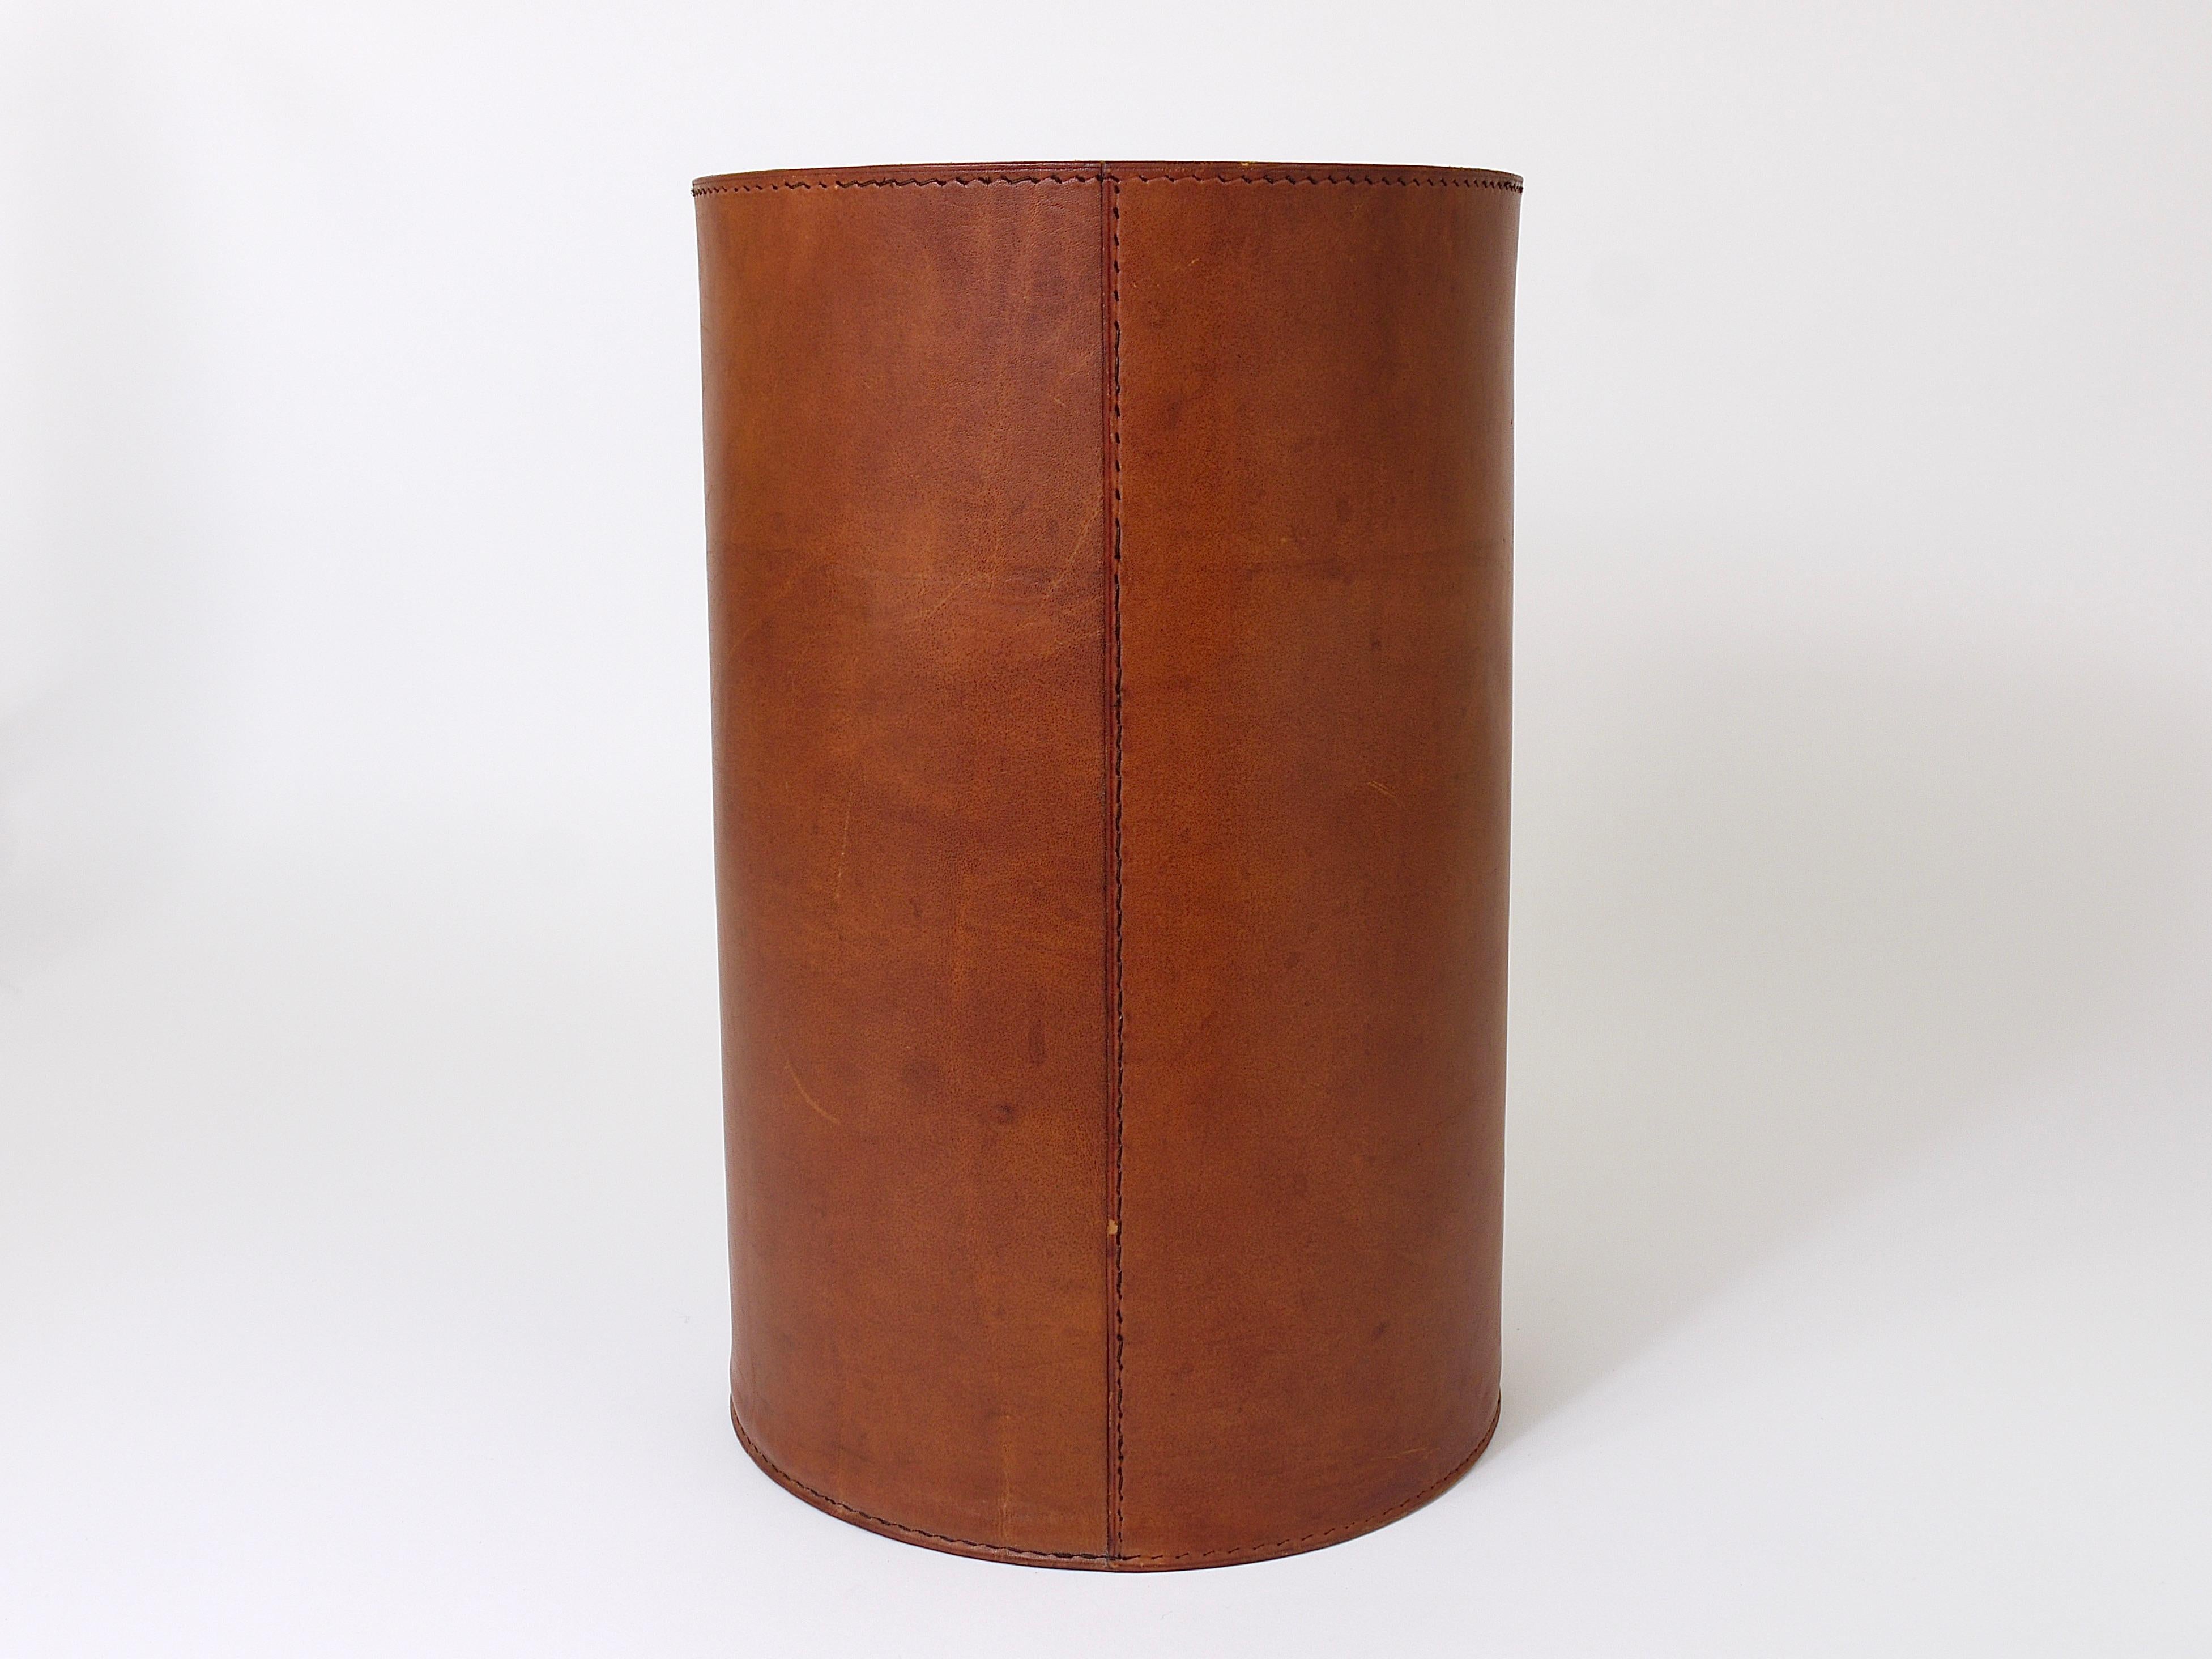 A beautiful cylindric Mid-Century Modern wastepaper basket from the 1950s, designed an executed by Carl Auböck, Vienna. Made of cognac brown leather. The basket is showing signs of age and the leather charming patina.